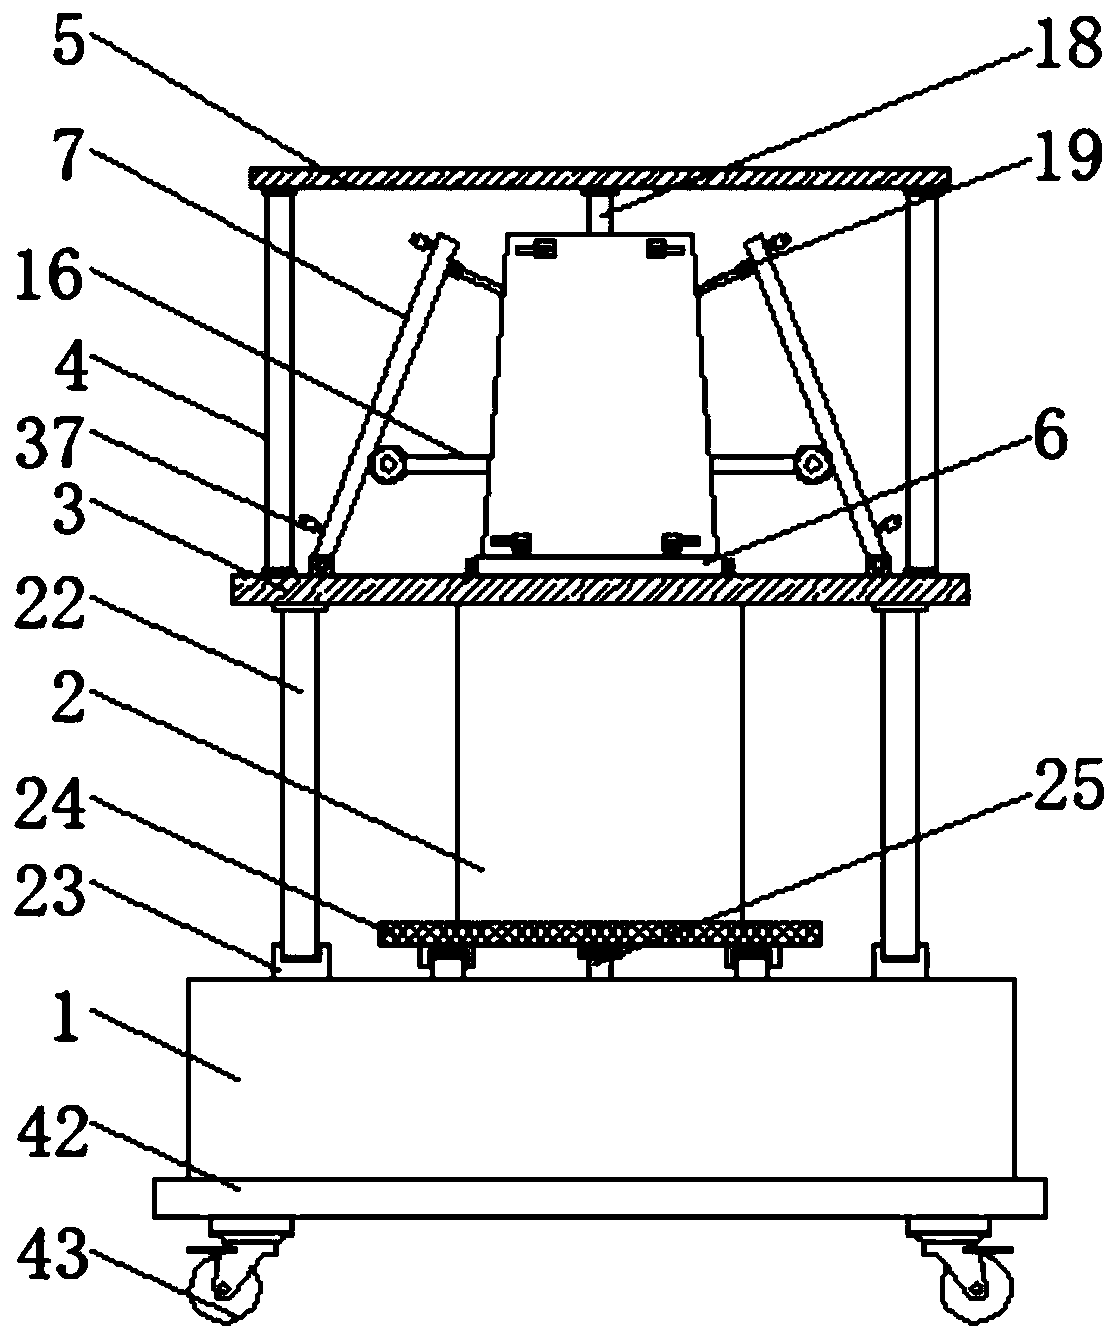 Display device and display method for advertisement design works